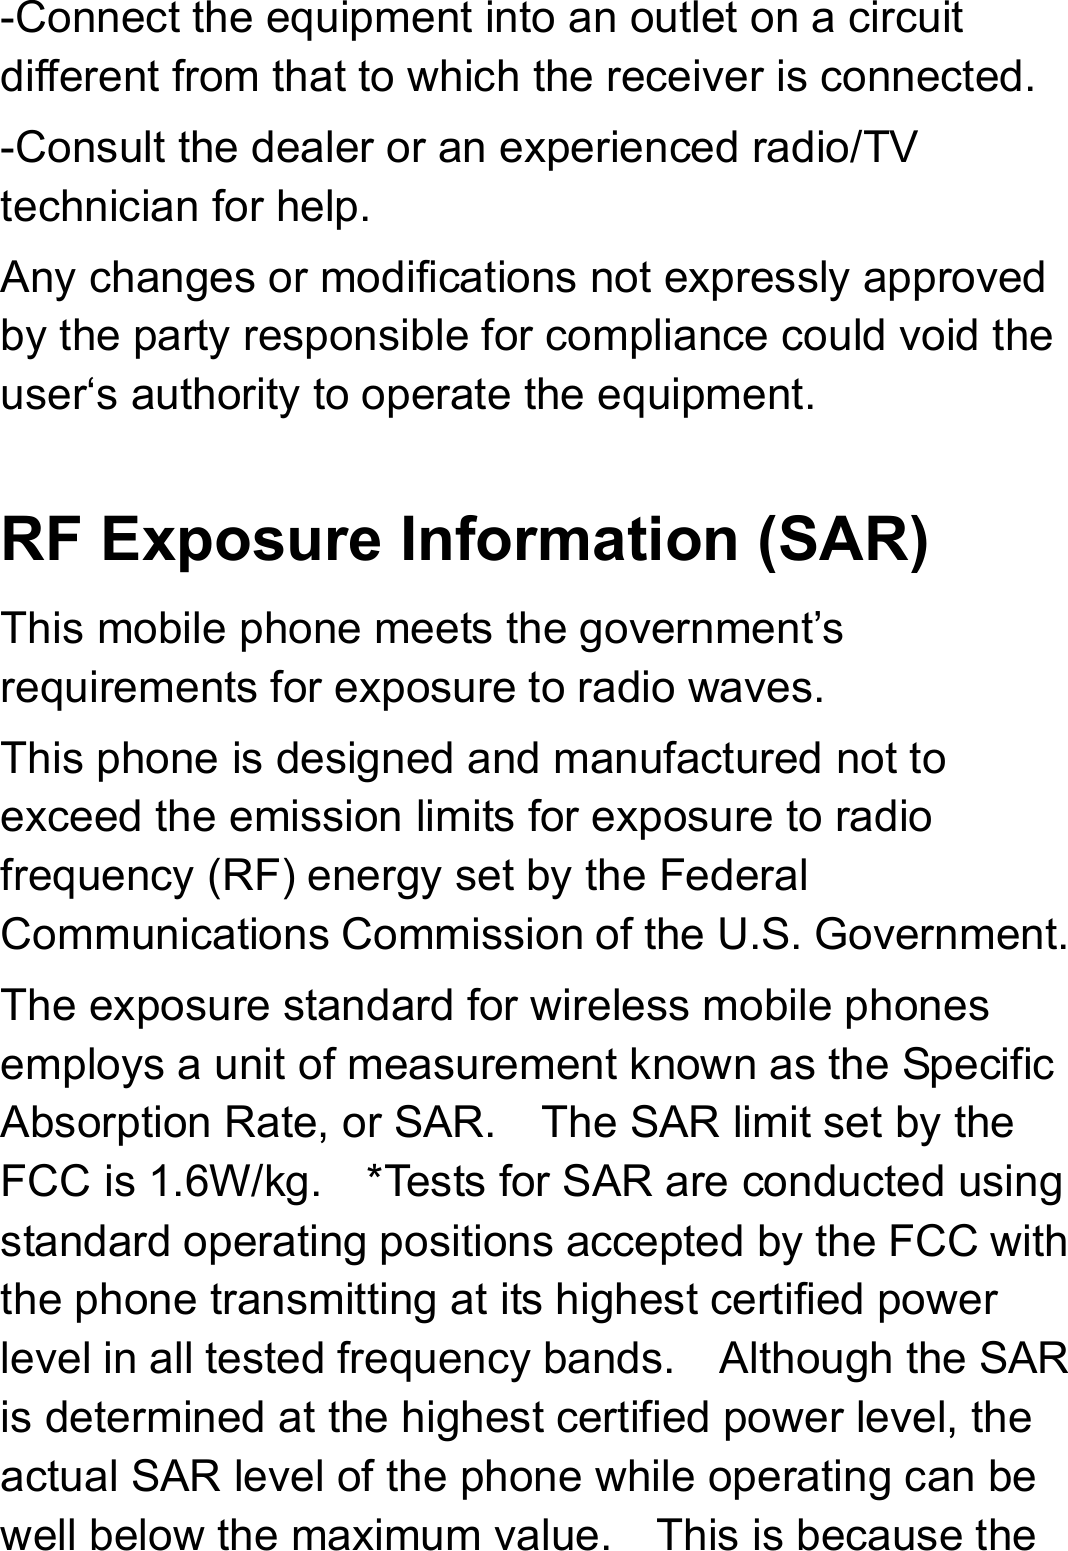 -Connect the equipment into an outlet on a circuit different from that to which the receiver is connected. -Consult the dealer or an experienced radio/TV technician for help. Any changes or modifications not expressly approved by the party responsible for compliance could void the user‘s authority to operate the equipment.  RF Exposure Information (SAR) This mobile phone meets the government’s requirements for exposure to radio waves. This phone is designed and manufactured not to exceed the emission limits for exposure to radio frequency (RF) energy set by the Federal Communications Commission of the U.S. Government.   The exposure standard for wireless mobile phones employs a unit of measurement known as the Specific Absorption Rate, or SAR.    The SAR limit set by the FCC is 1.6W/kg.    *Tests for SAR are conducted using standard operating positions accepted by the FCC with the phone transmitting at its highest certified power level in all tested frequency bands.    Although the SAR is determined at the highest certified power level, the actual SAR level of the phone while operating can be well below the maximum value.    This is because the 